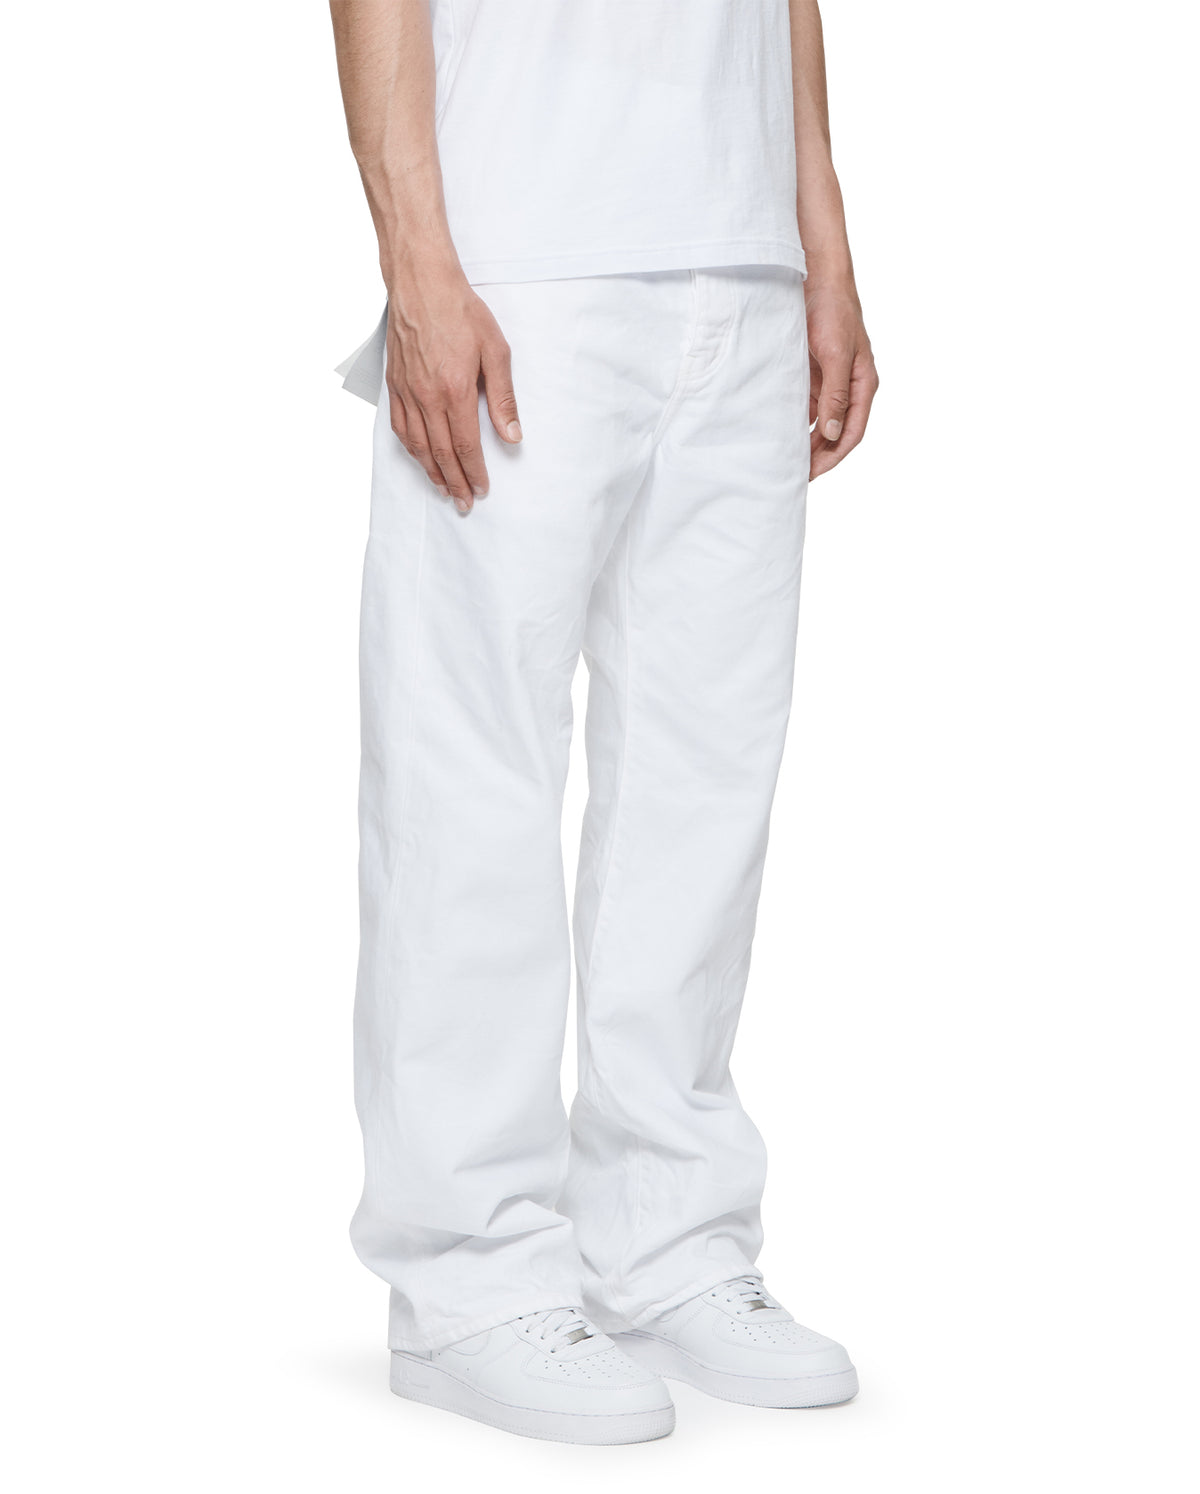 Rinsed Baggy Jean - White